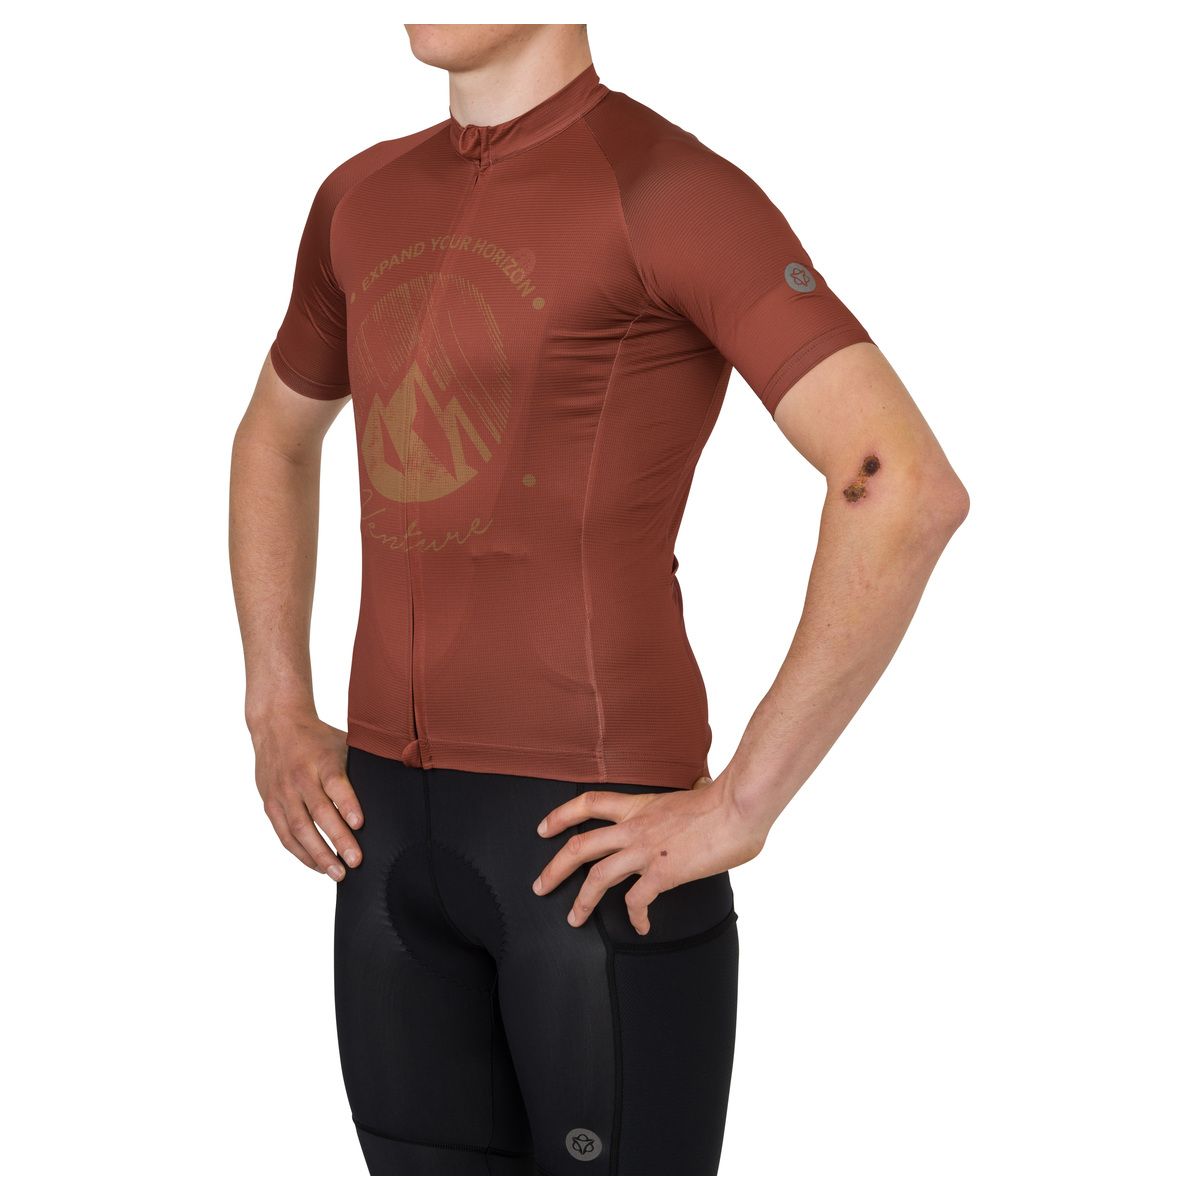 Gravel Maillots SS Venture Homme fit example